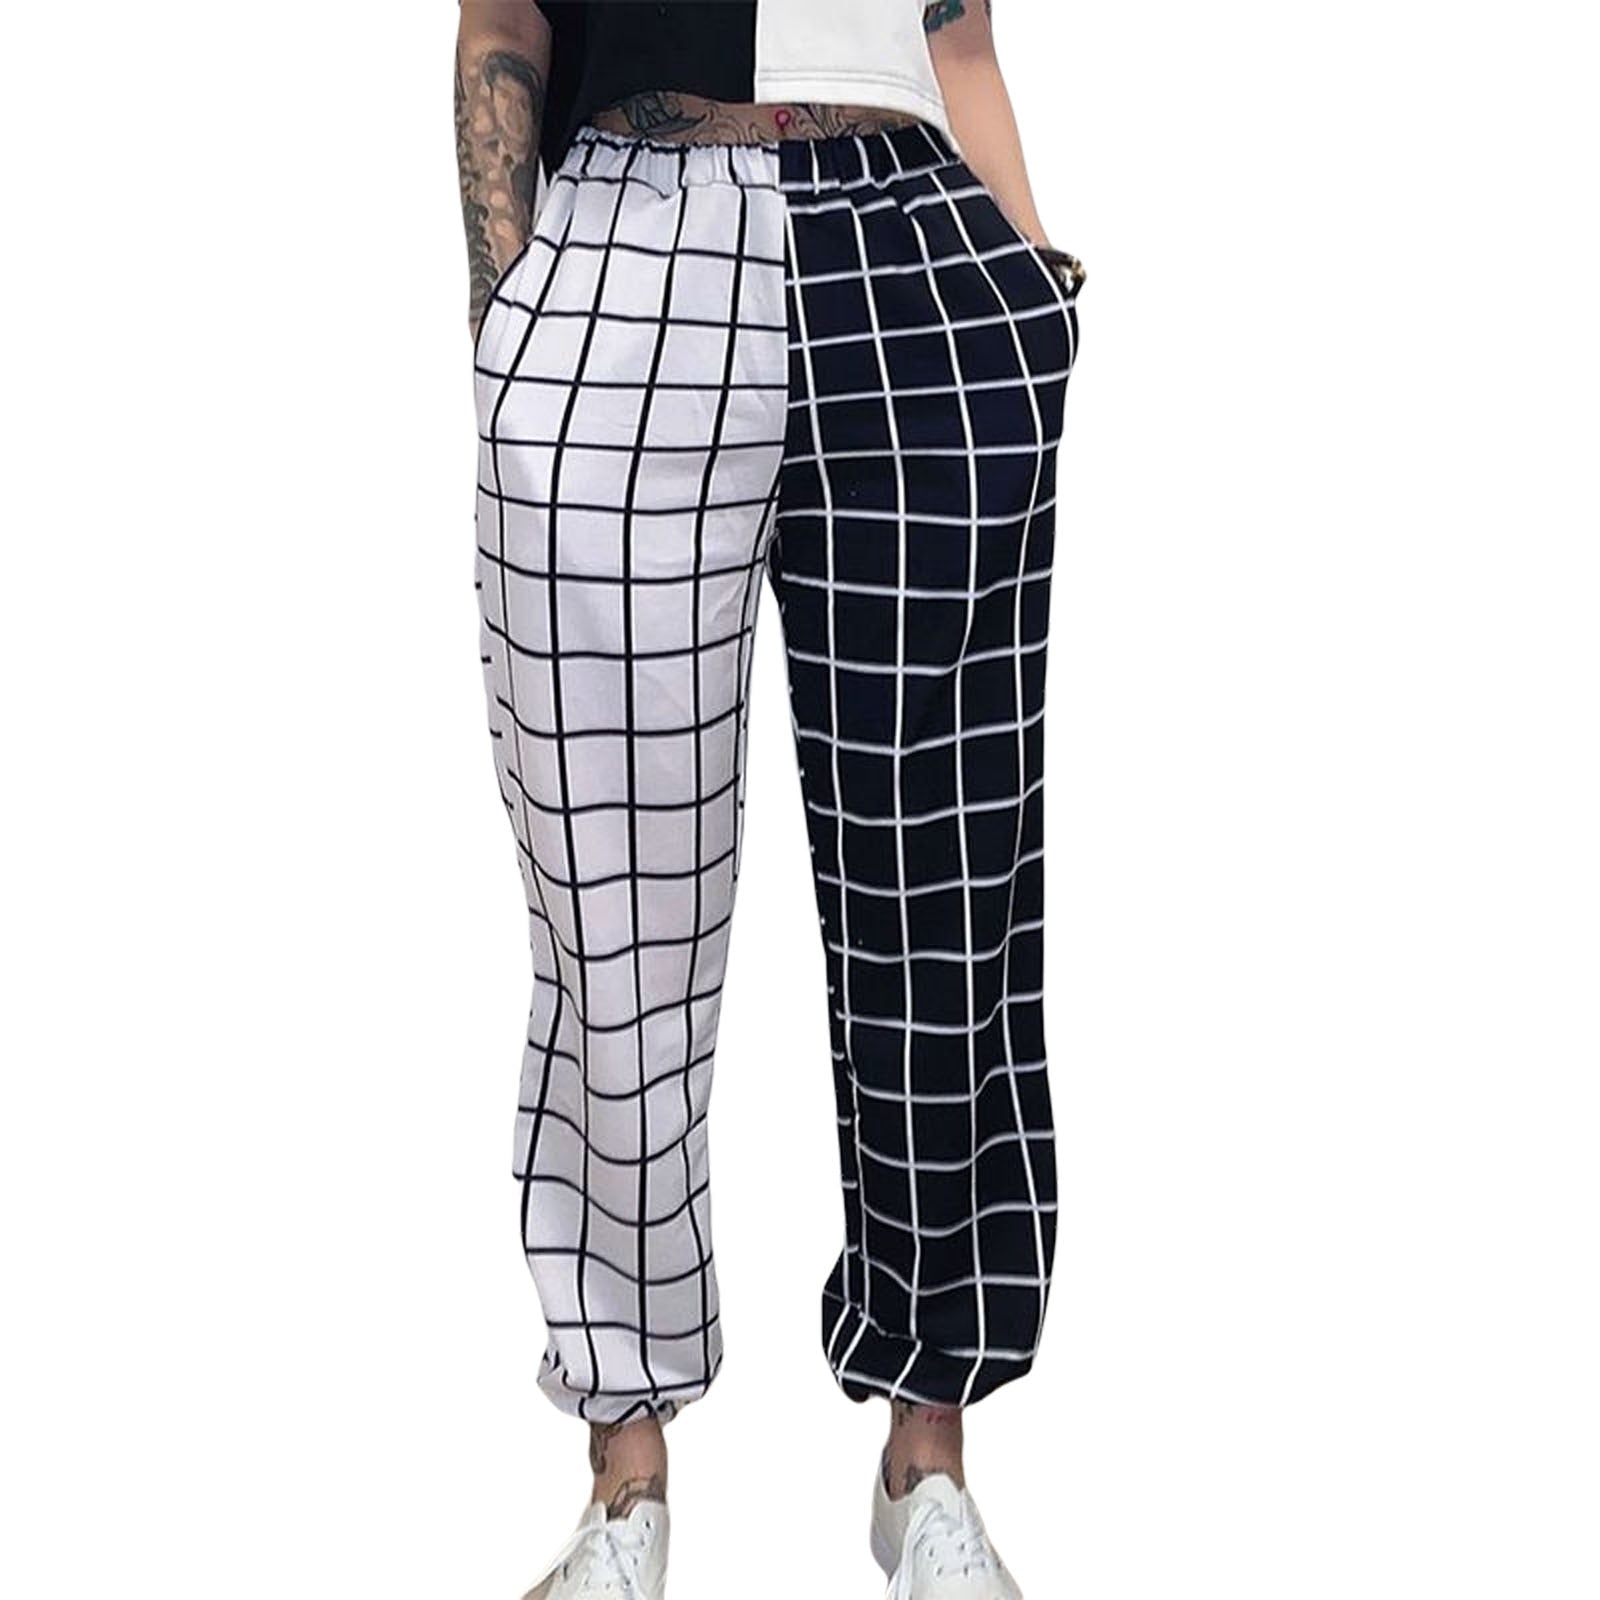 Geumxl New Styles Black White Plaid Patchwork Women's Jogger Pants Cargo Pants Hight Waist Straight Long Trousers Sprots Pant Casual